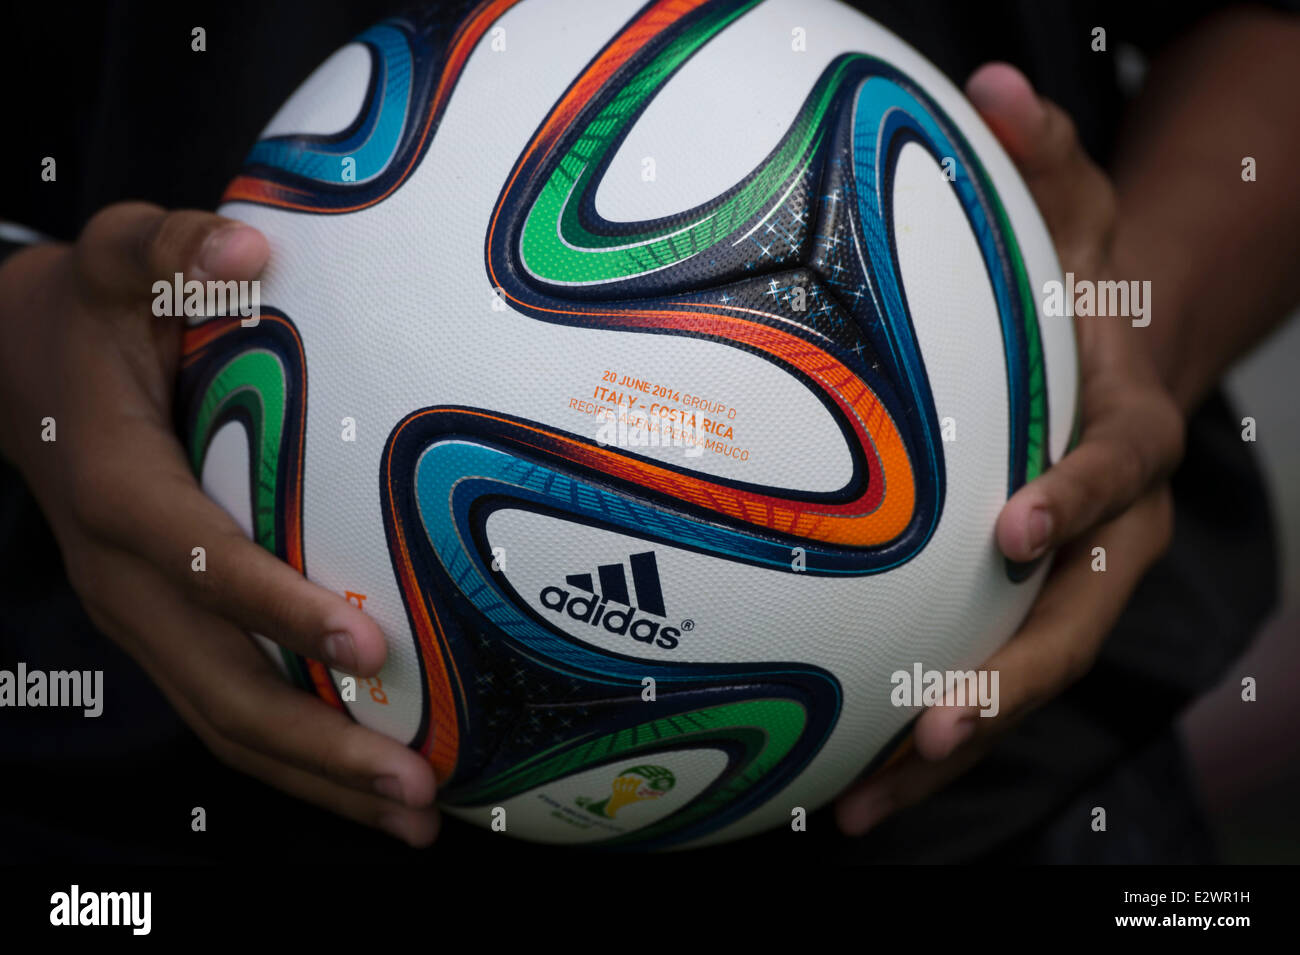 Adidas Brazuca World Cup 2014 Football, The Official Match ball for the  2014 World Cup with football boots on a white background Stock Photo - Alamy